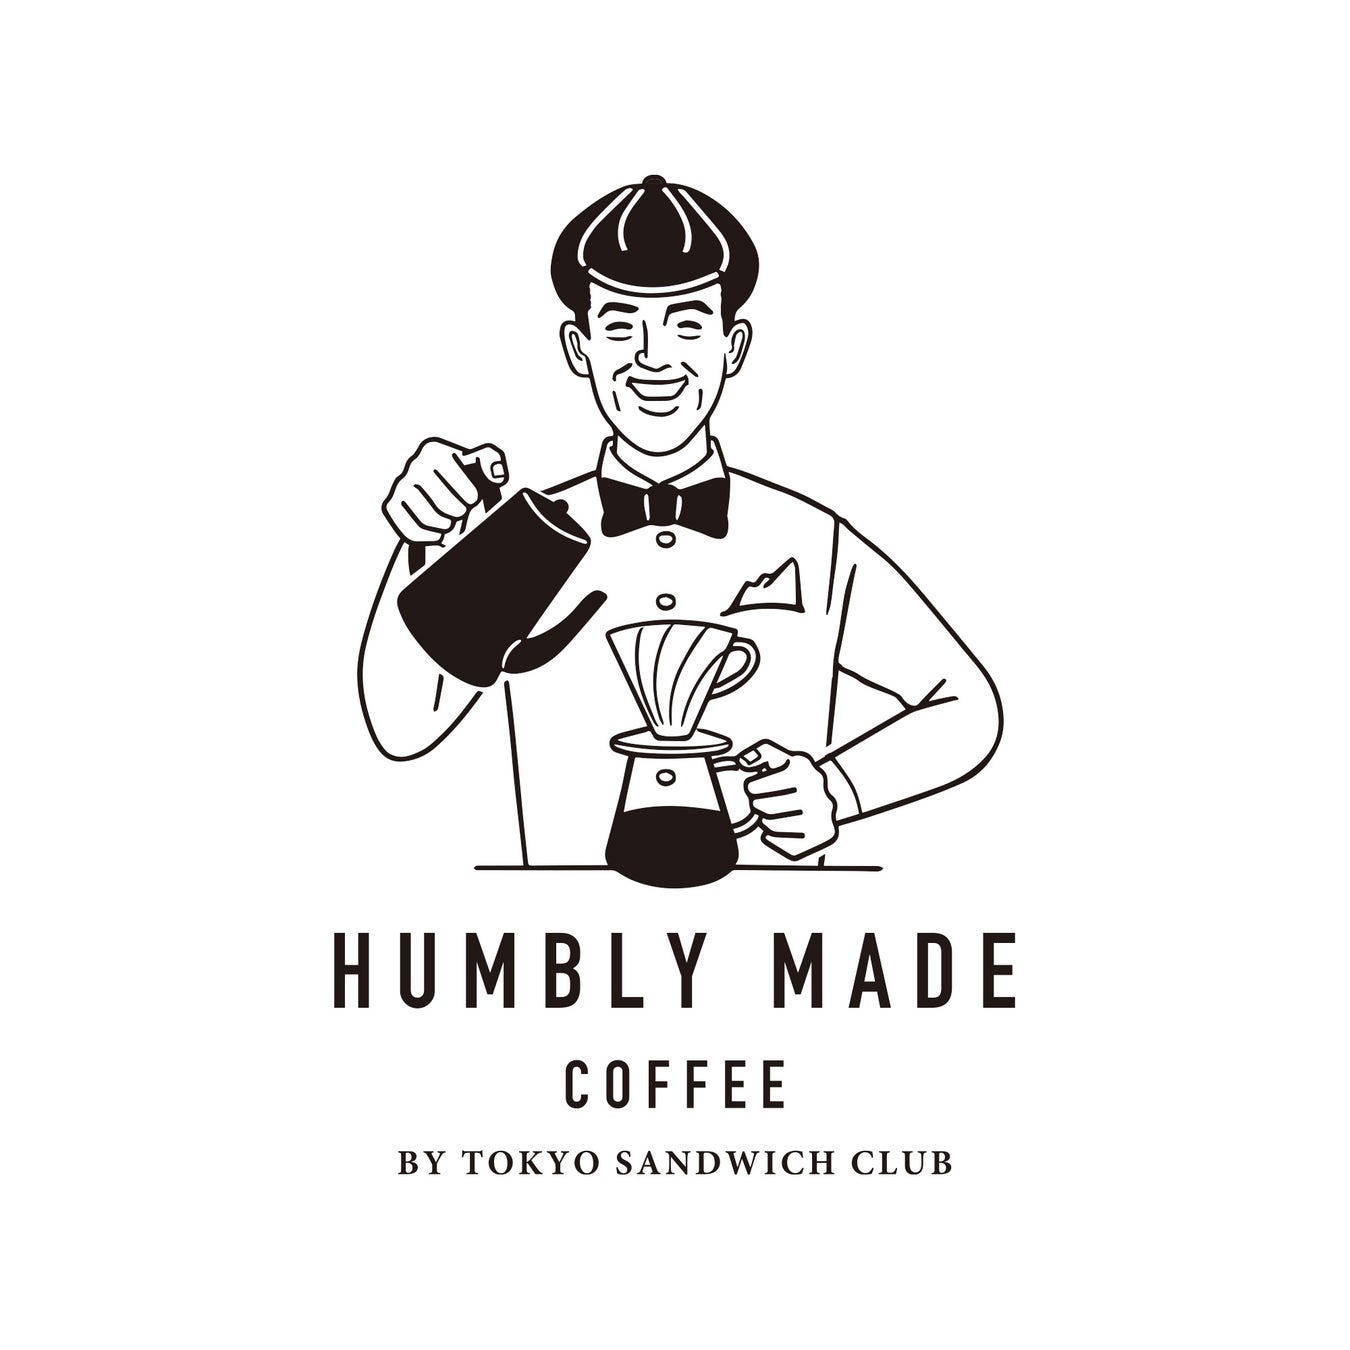 「HUMBLY MADE COFFEE」 2023年12月13日 日本橋三越本店5階にて NEW OPEN。